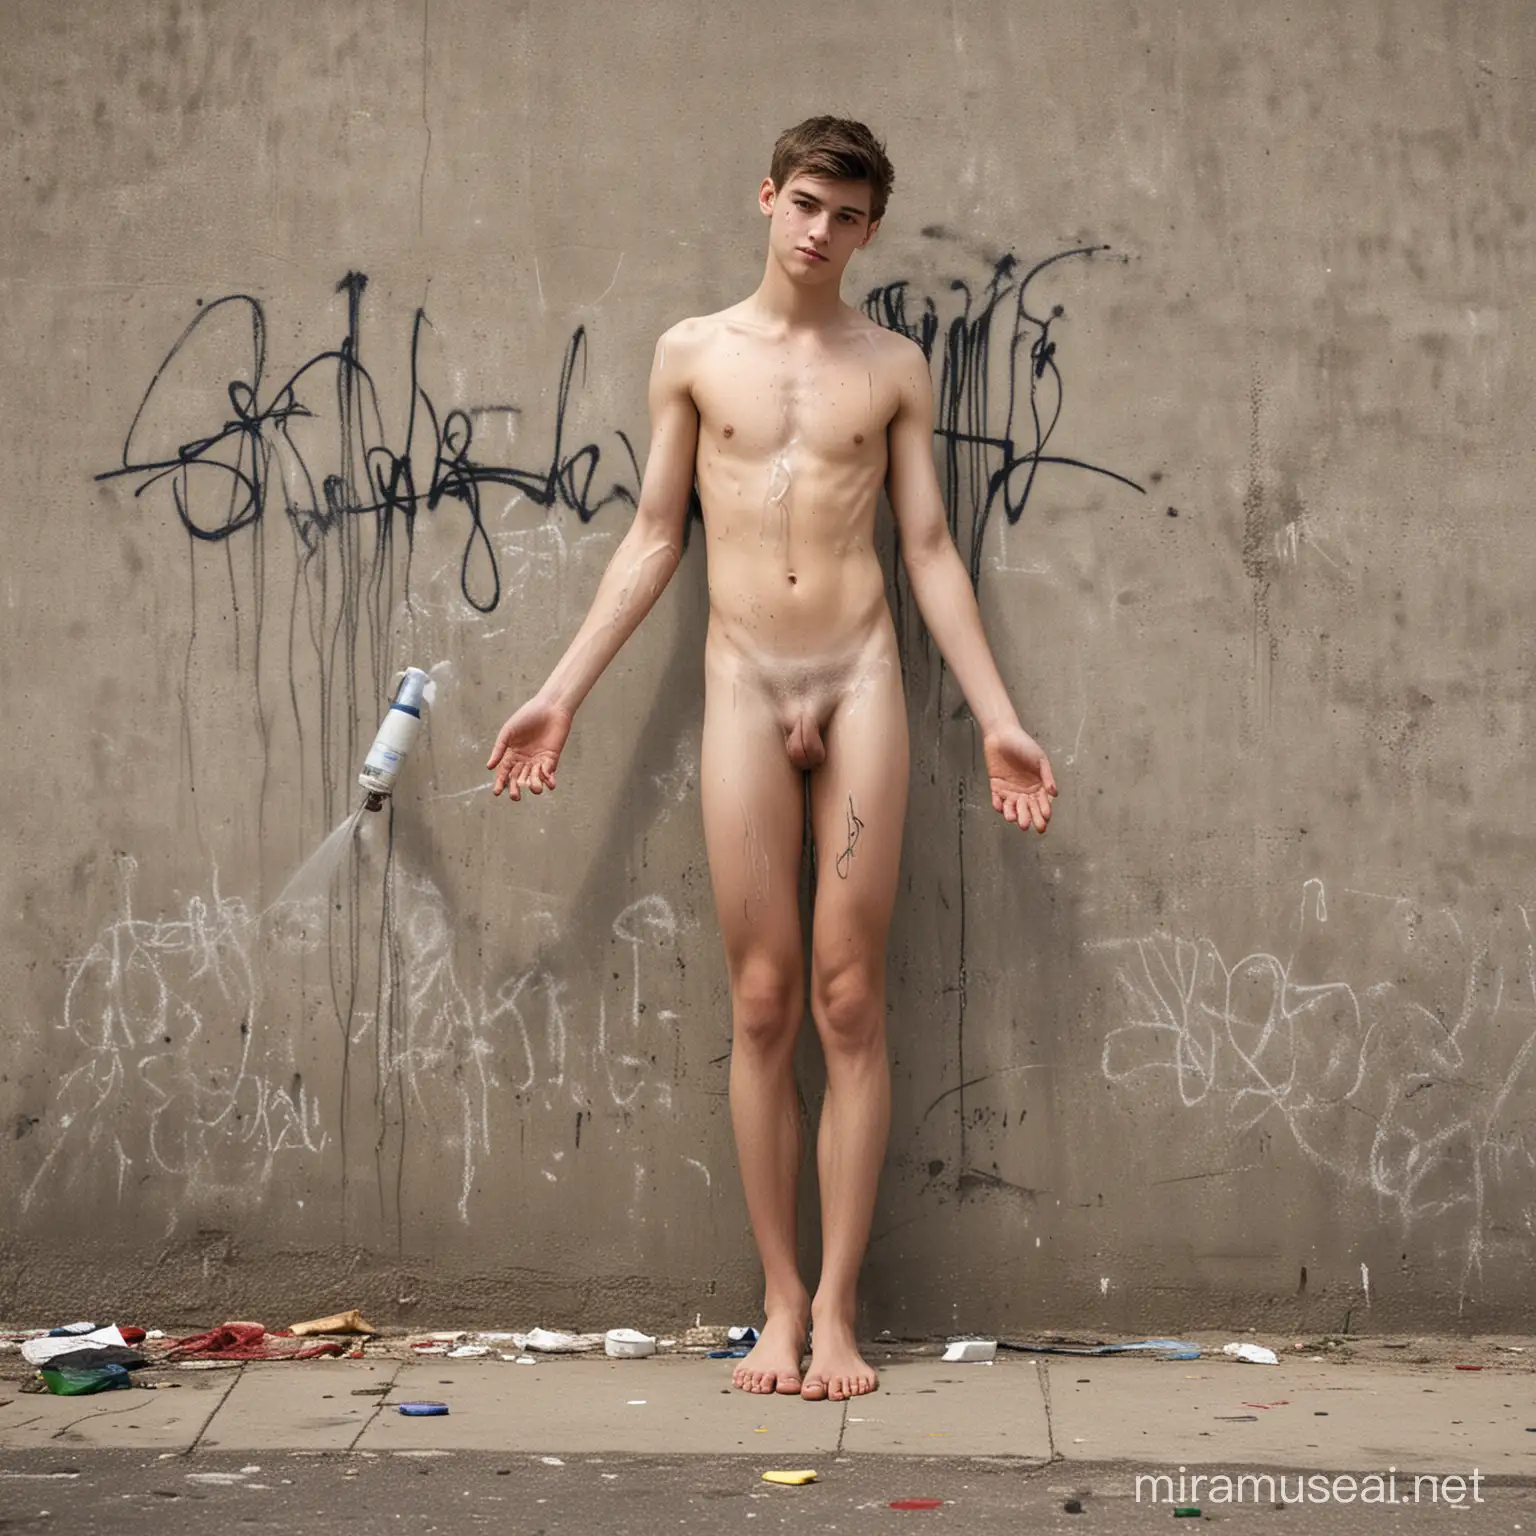 Naked Teen Graffiti Artist Depicts Shame and Expression